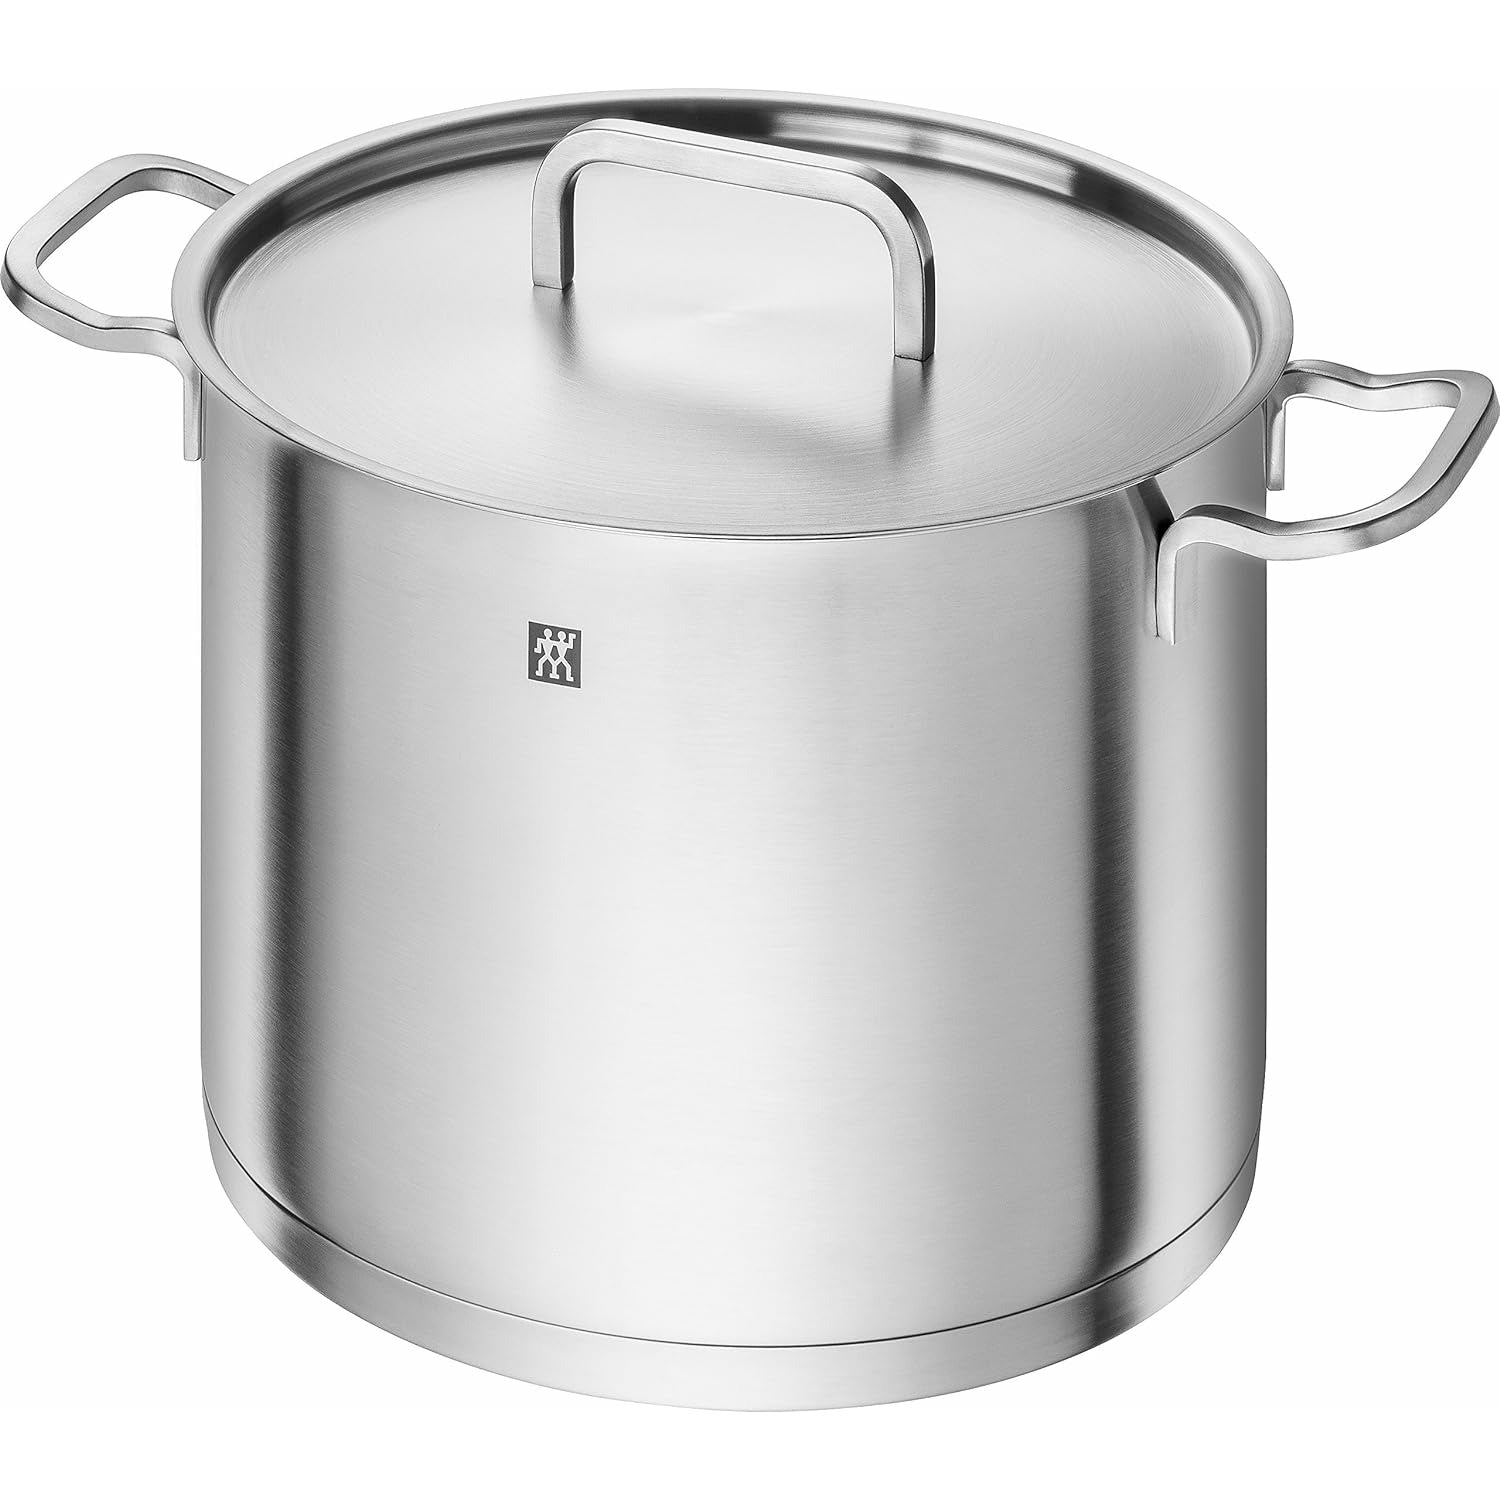 Zwilling Stainless Steel 24cm Stockpot with Lid  66244-240